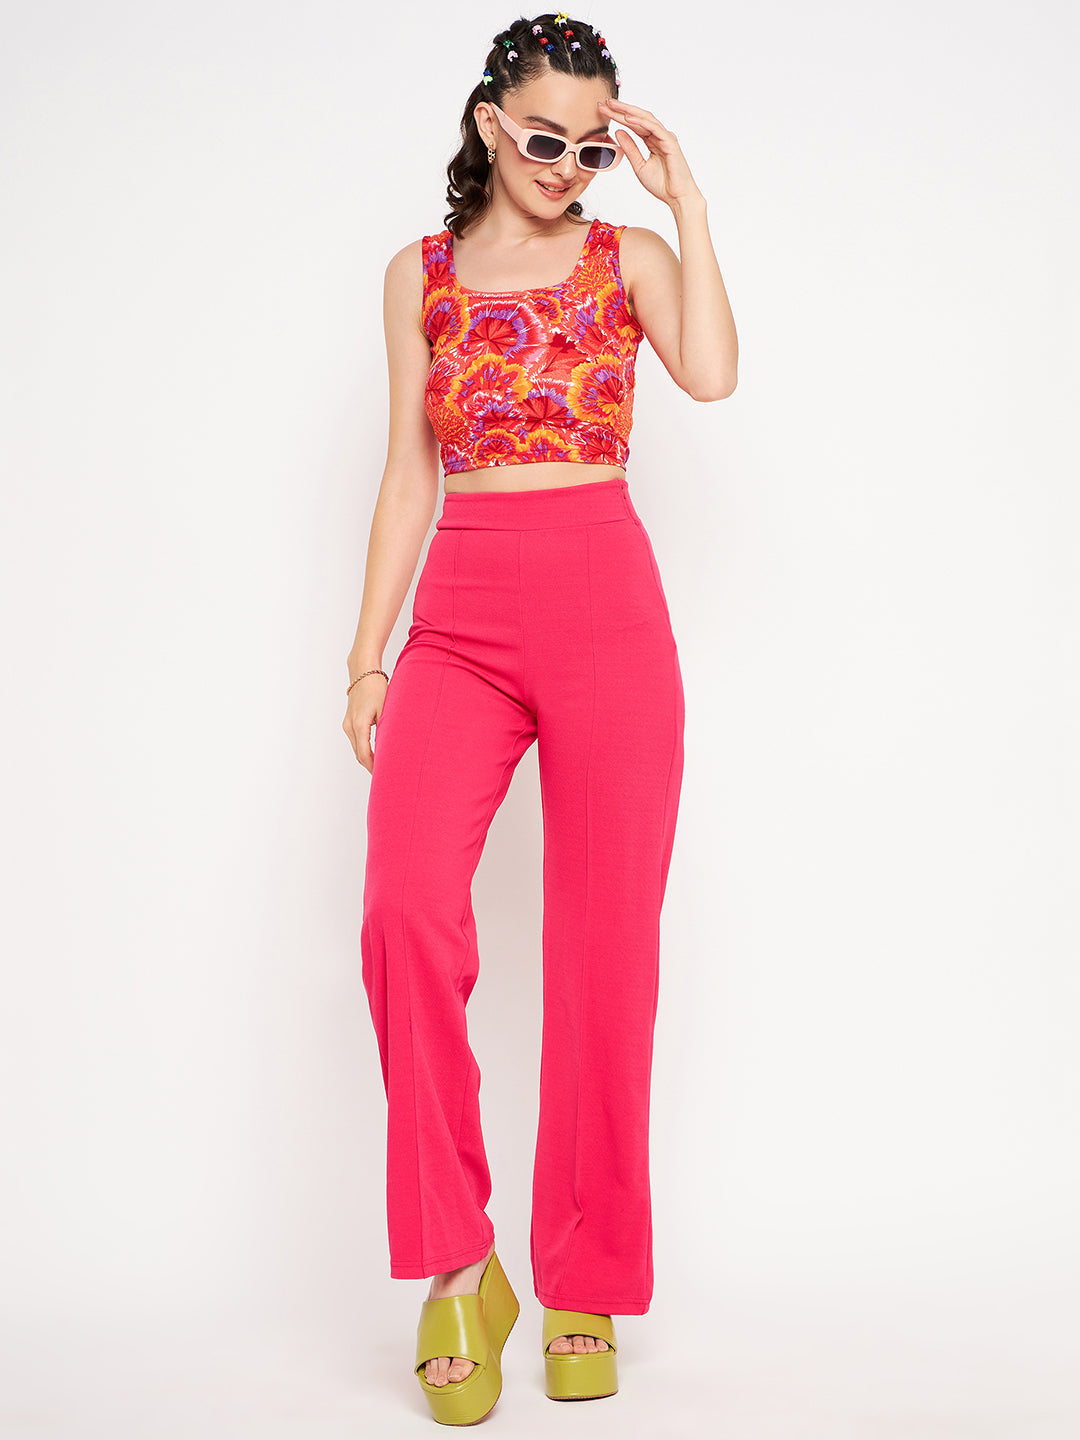 KASSUALLY Trousers and Pants  Buy KASSUALLY Black High Waist Flared Parallel  Trouser Online  Nykaa Fashion